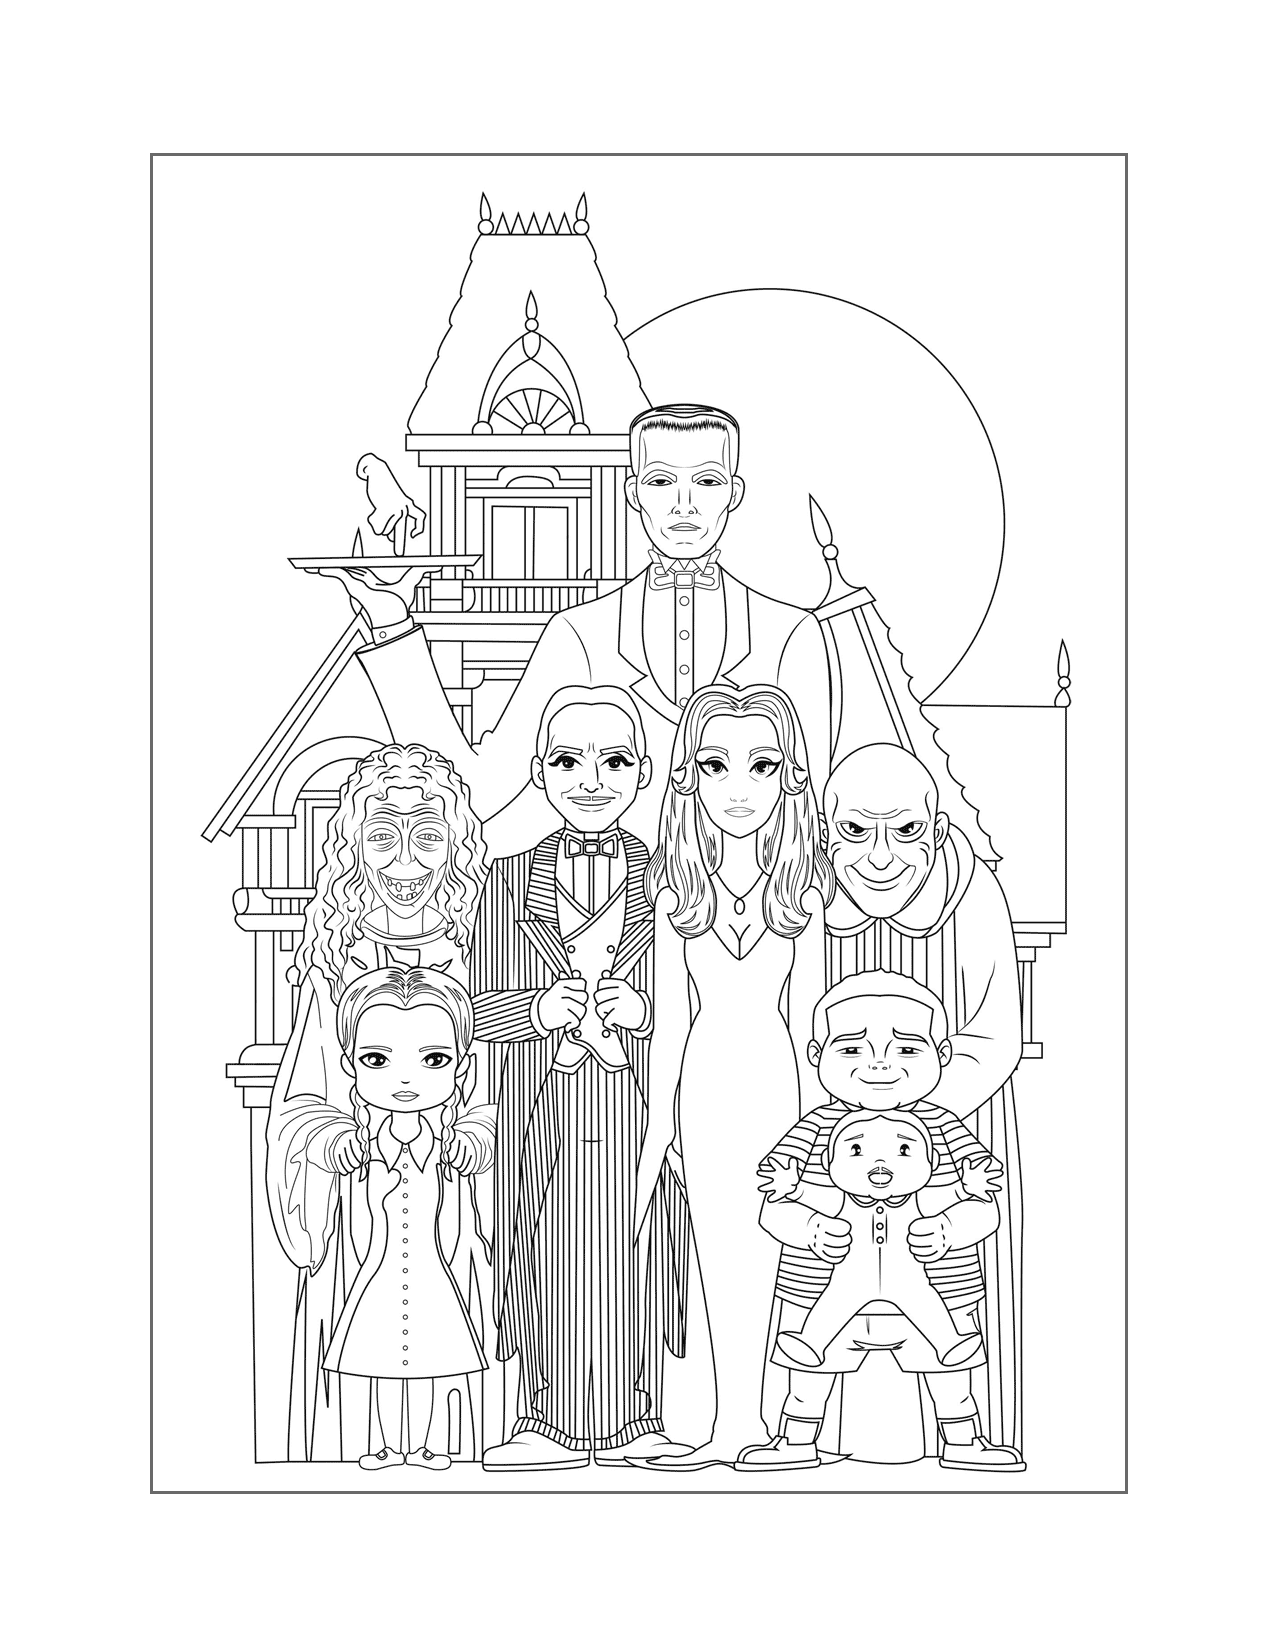 Addams Family Portrait Coloring Page